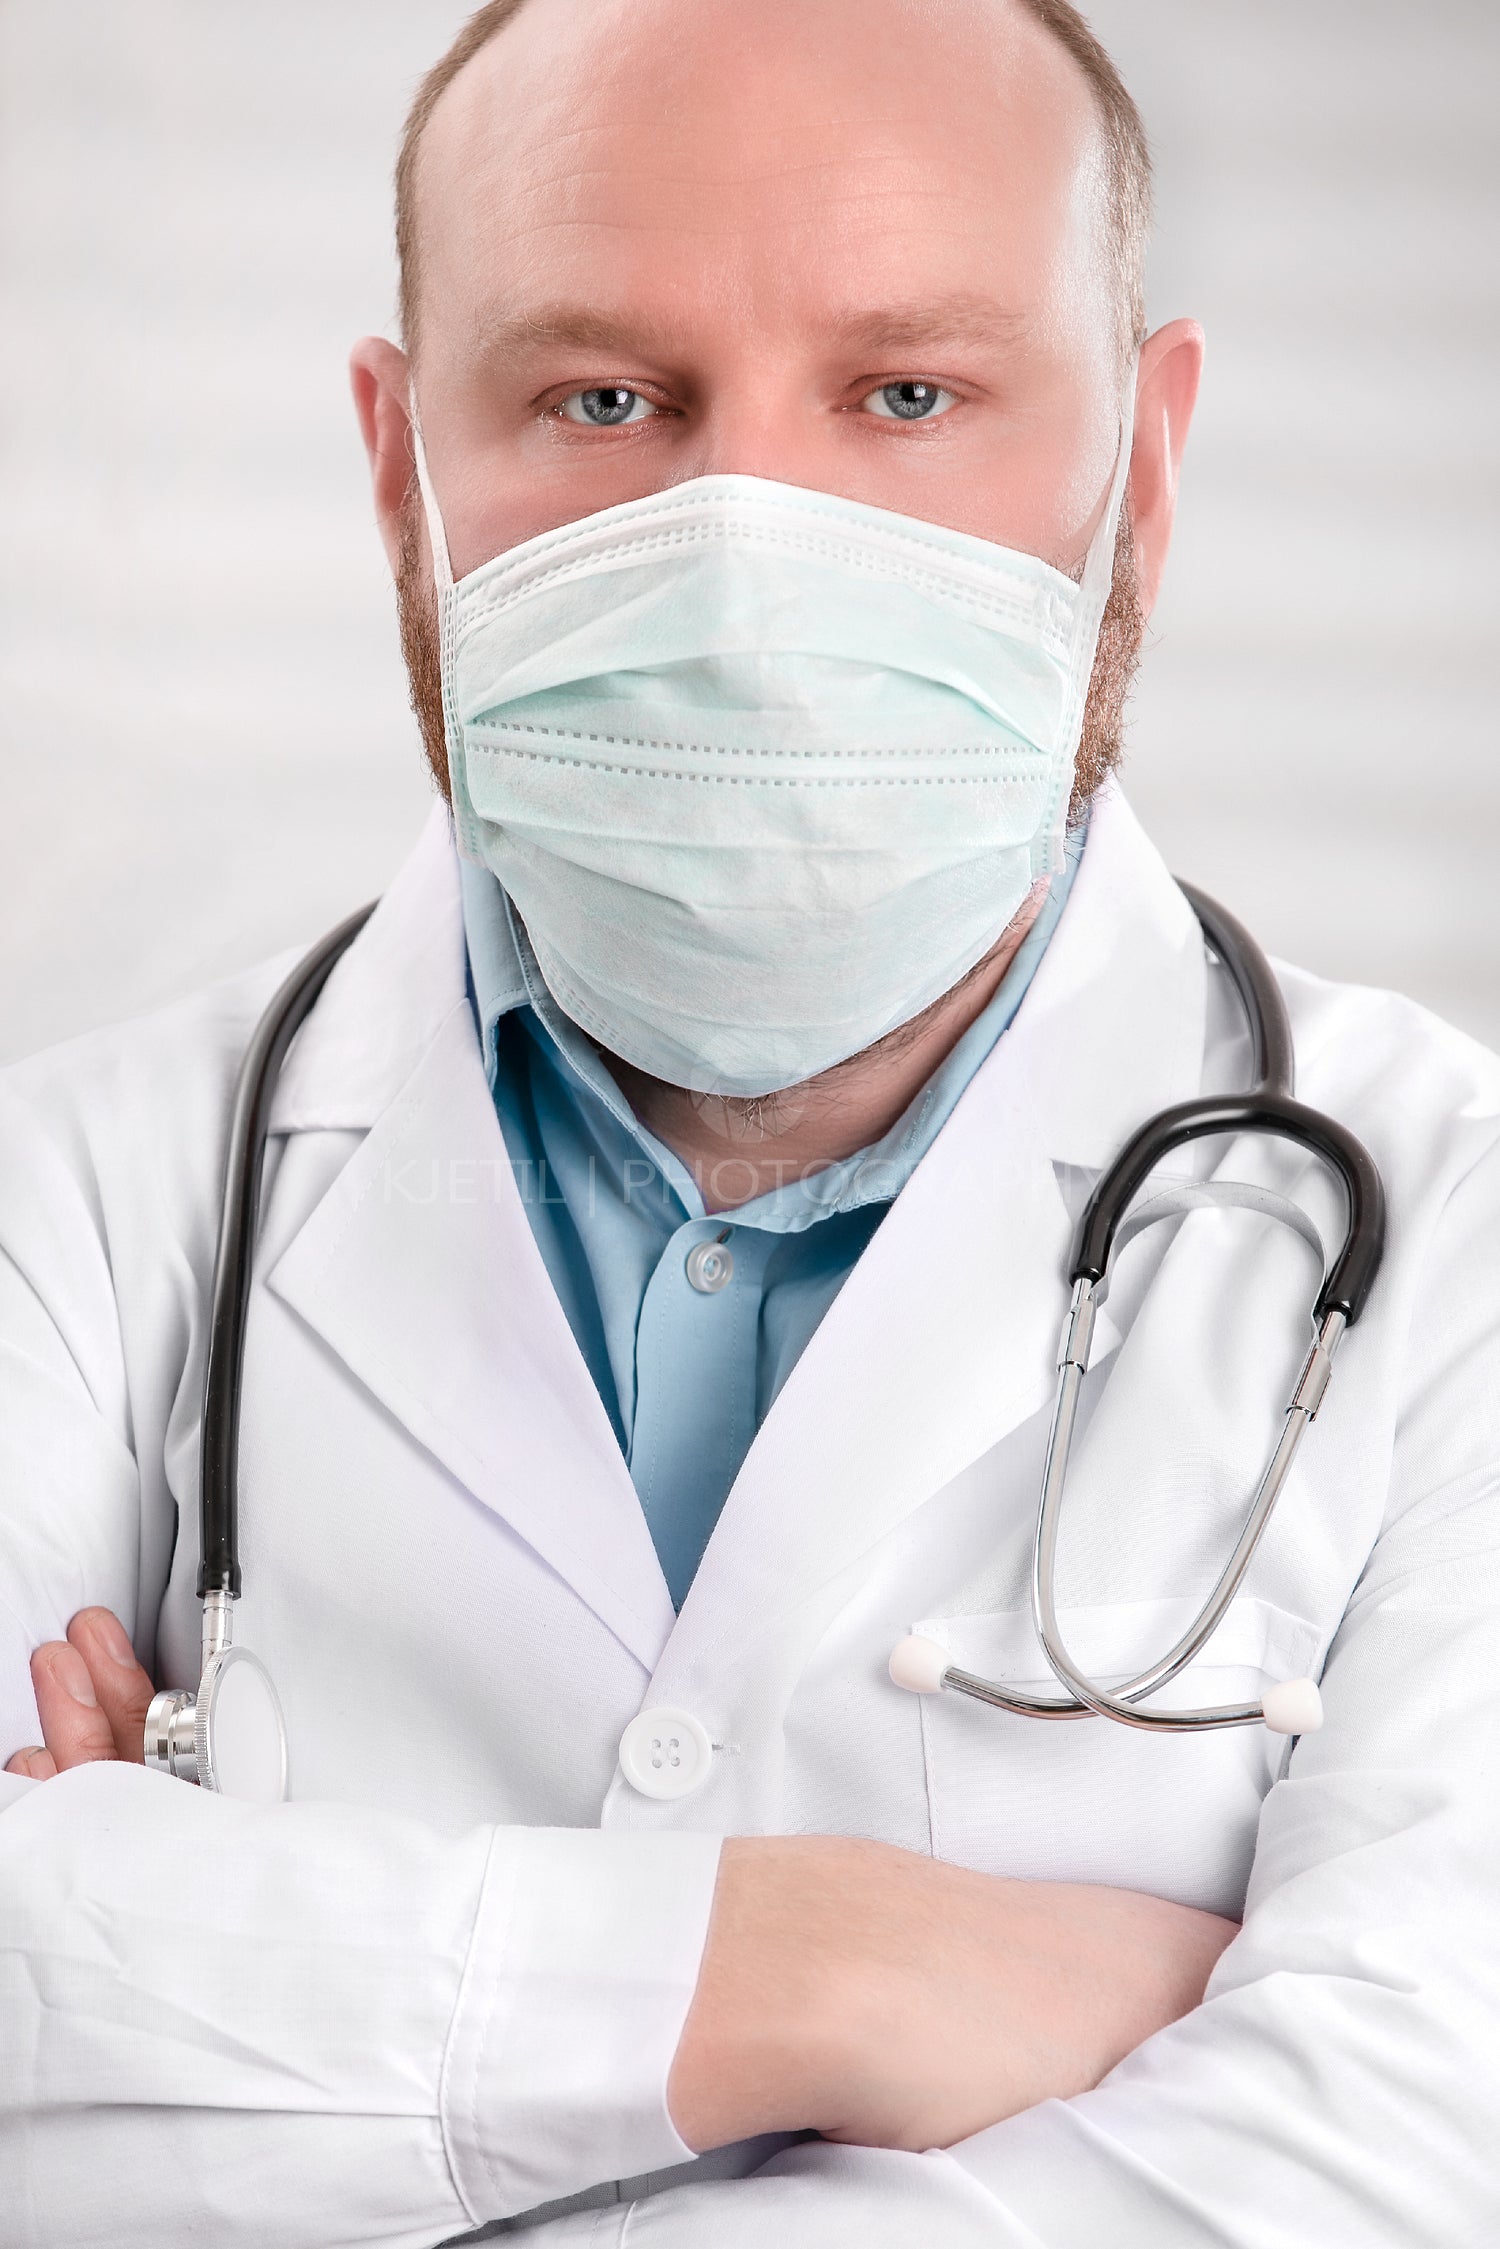 Portrait of a serious doctor wearing protective face mask and stethoscope